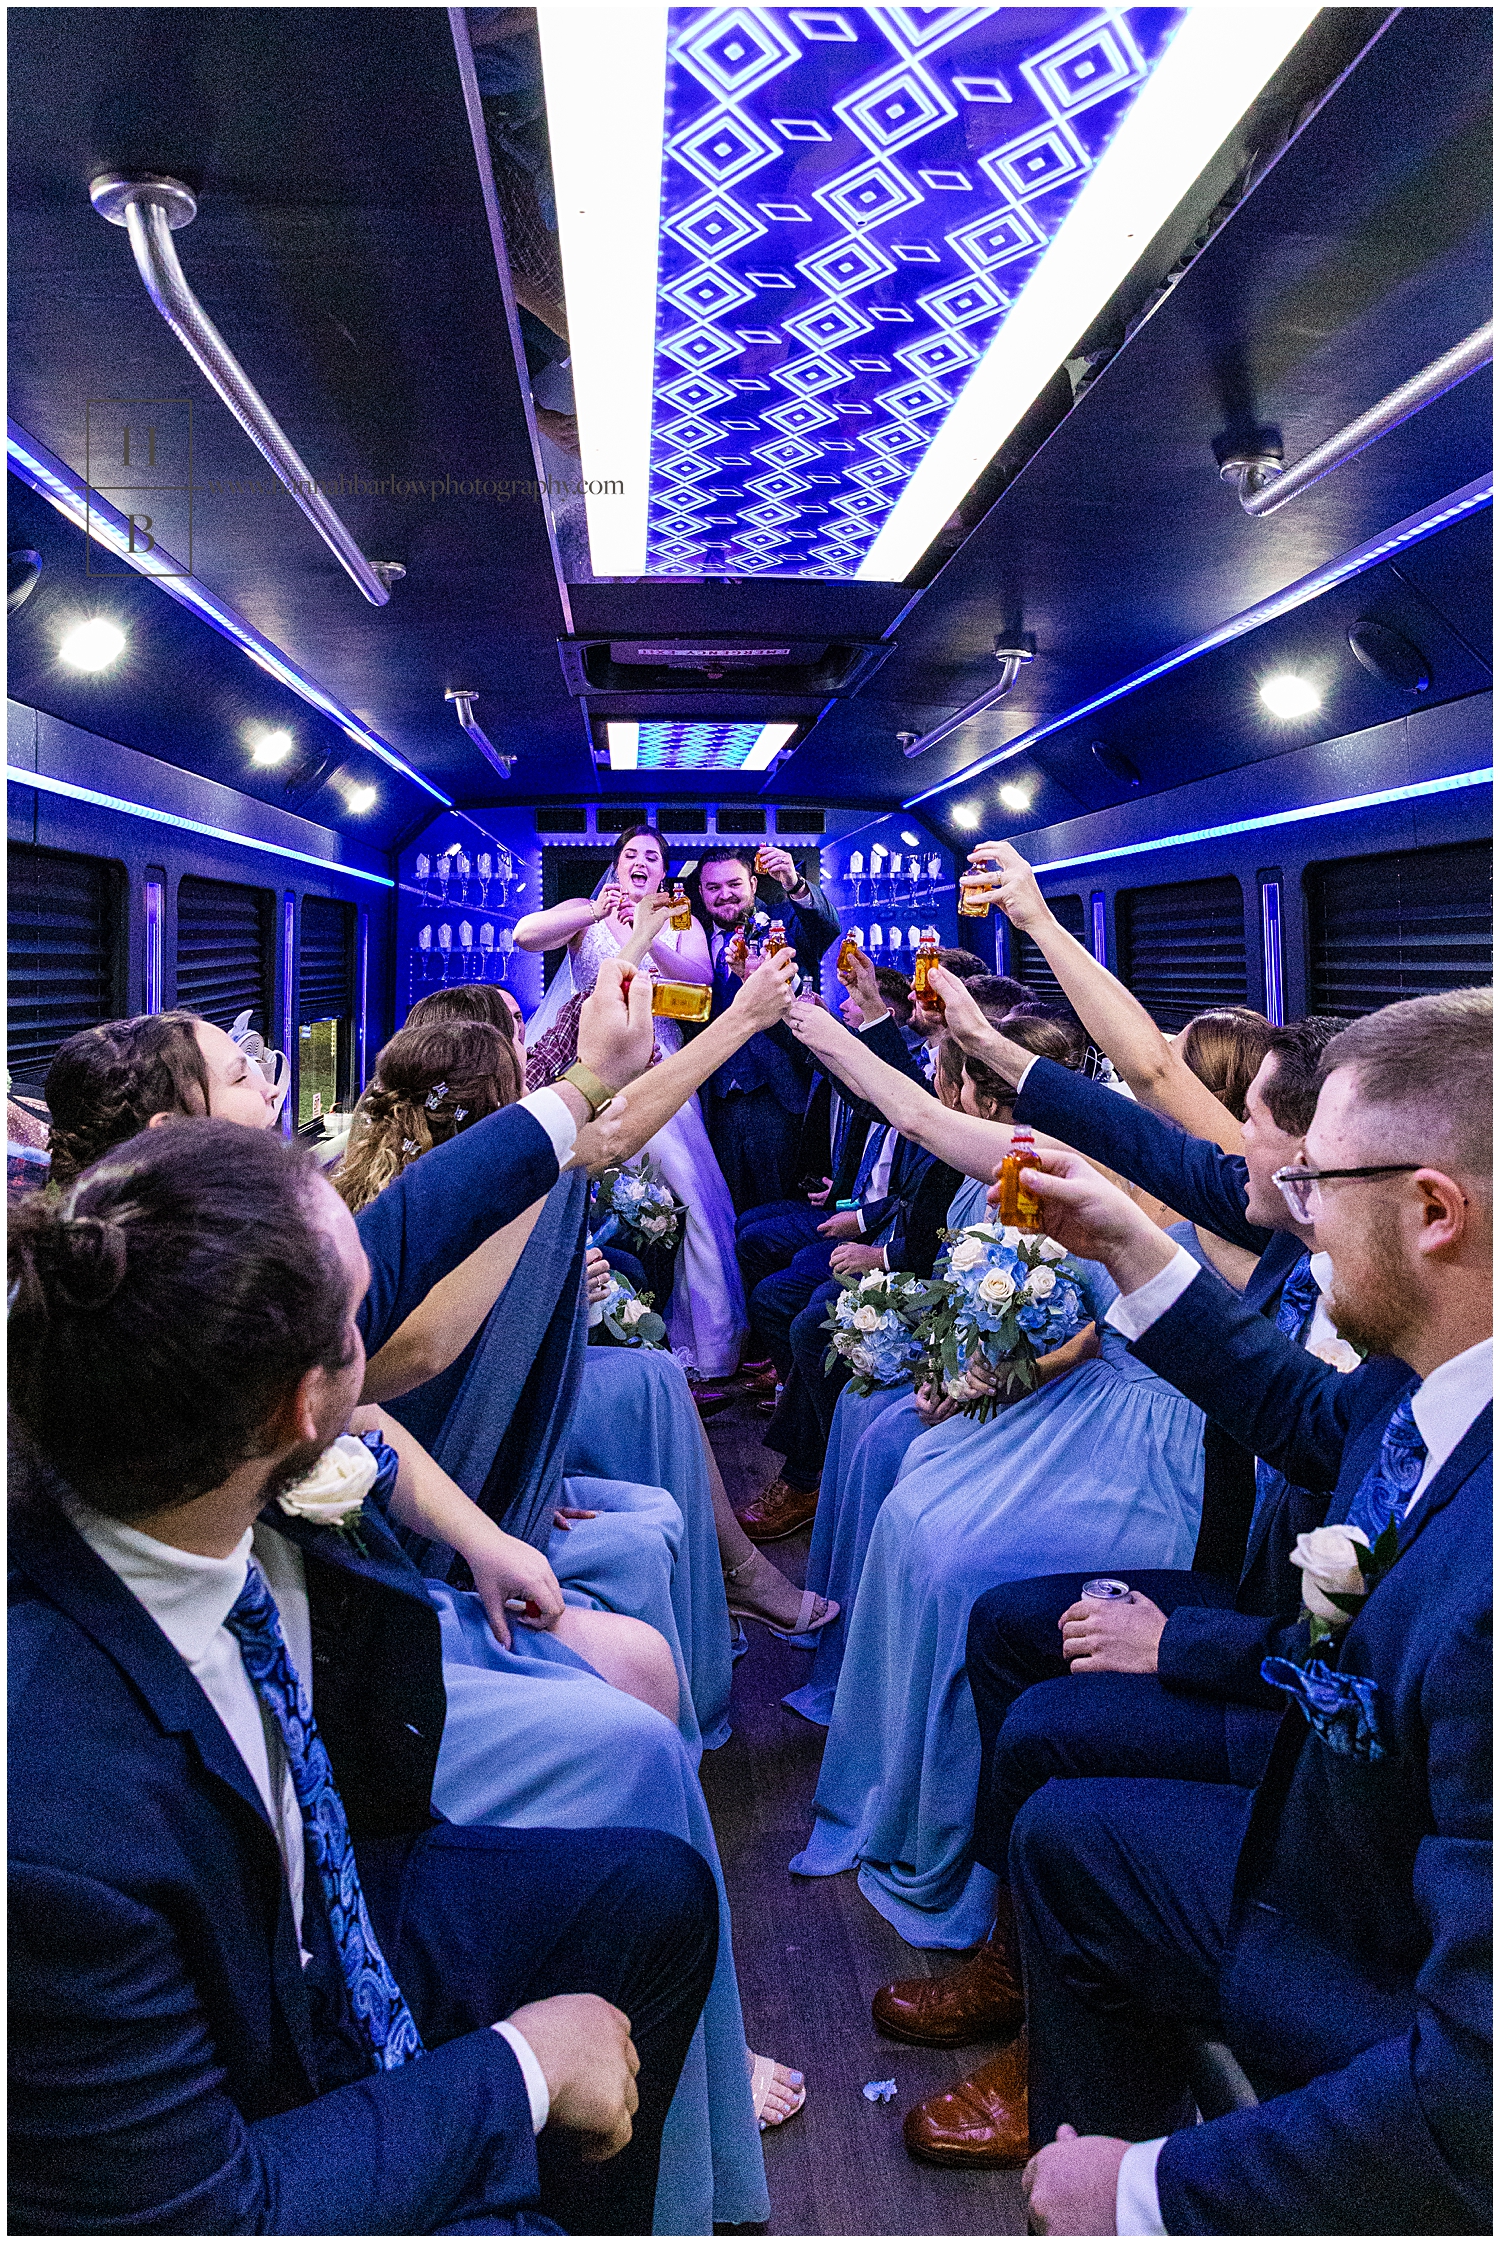 Couple in blue lighted limo hold up shots and cheer